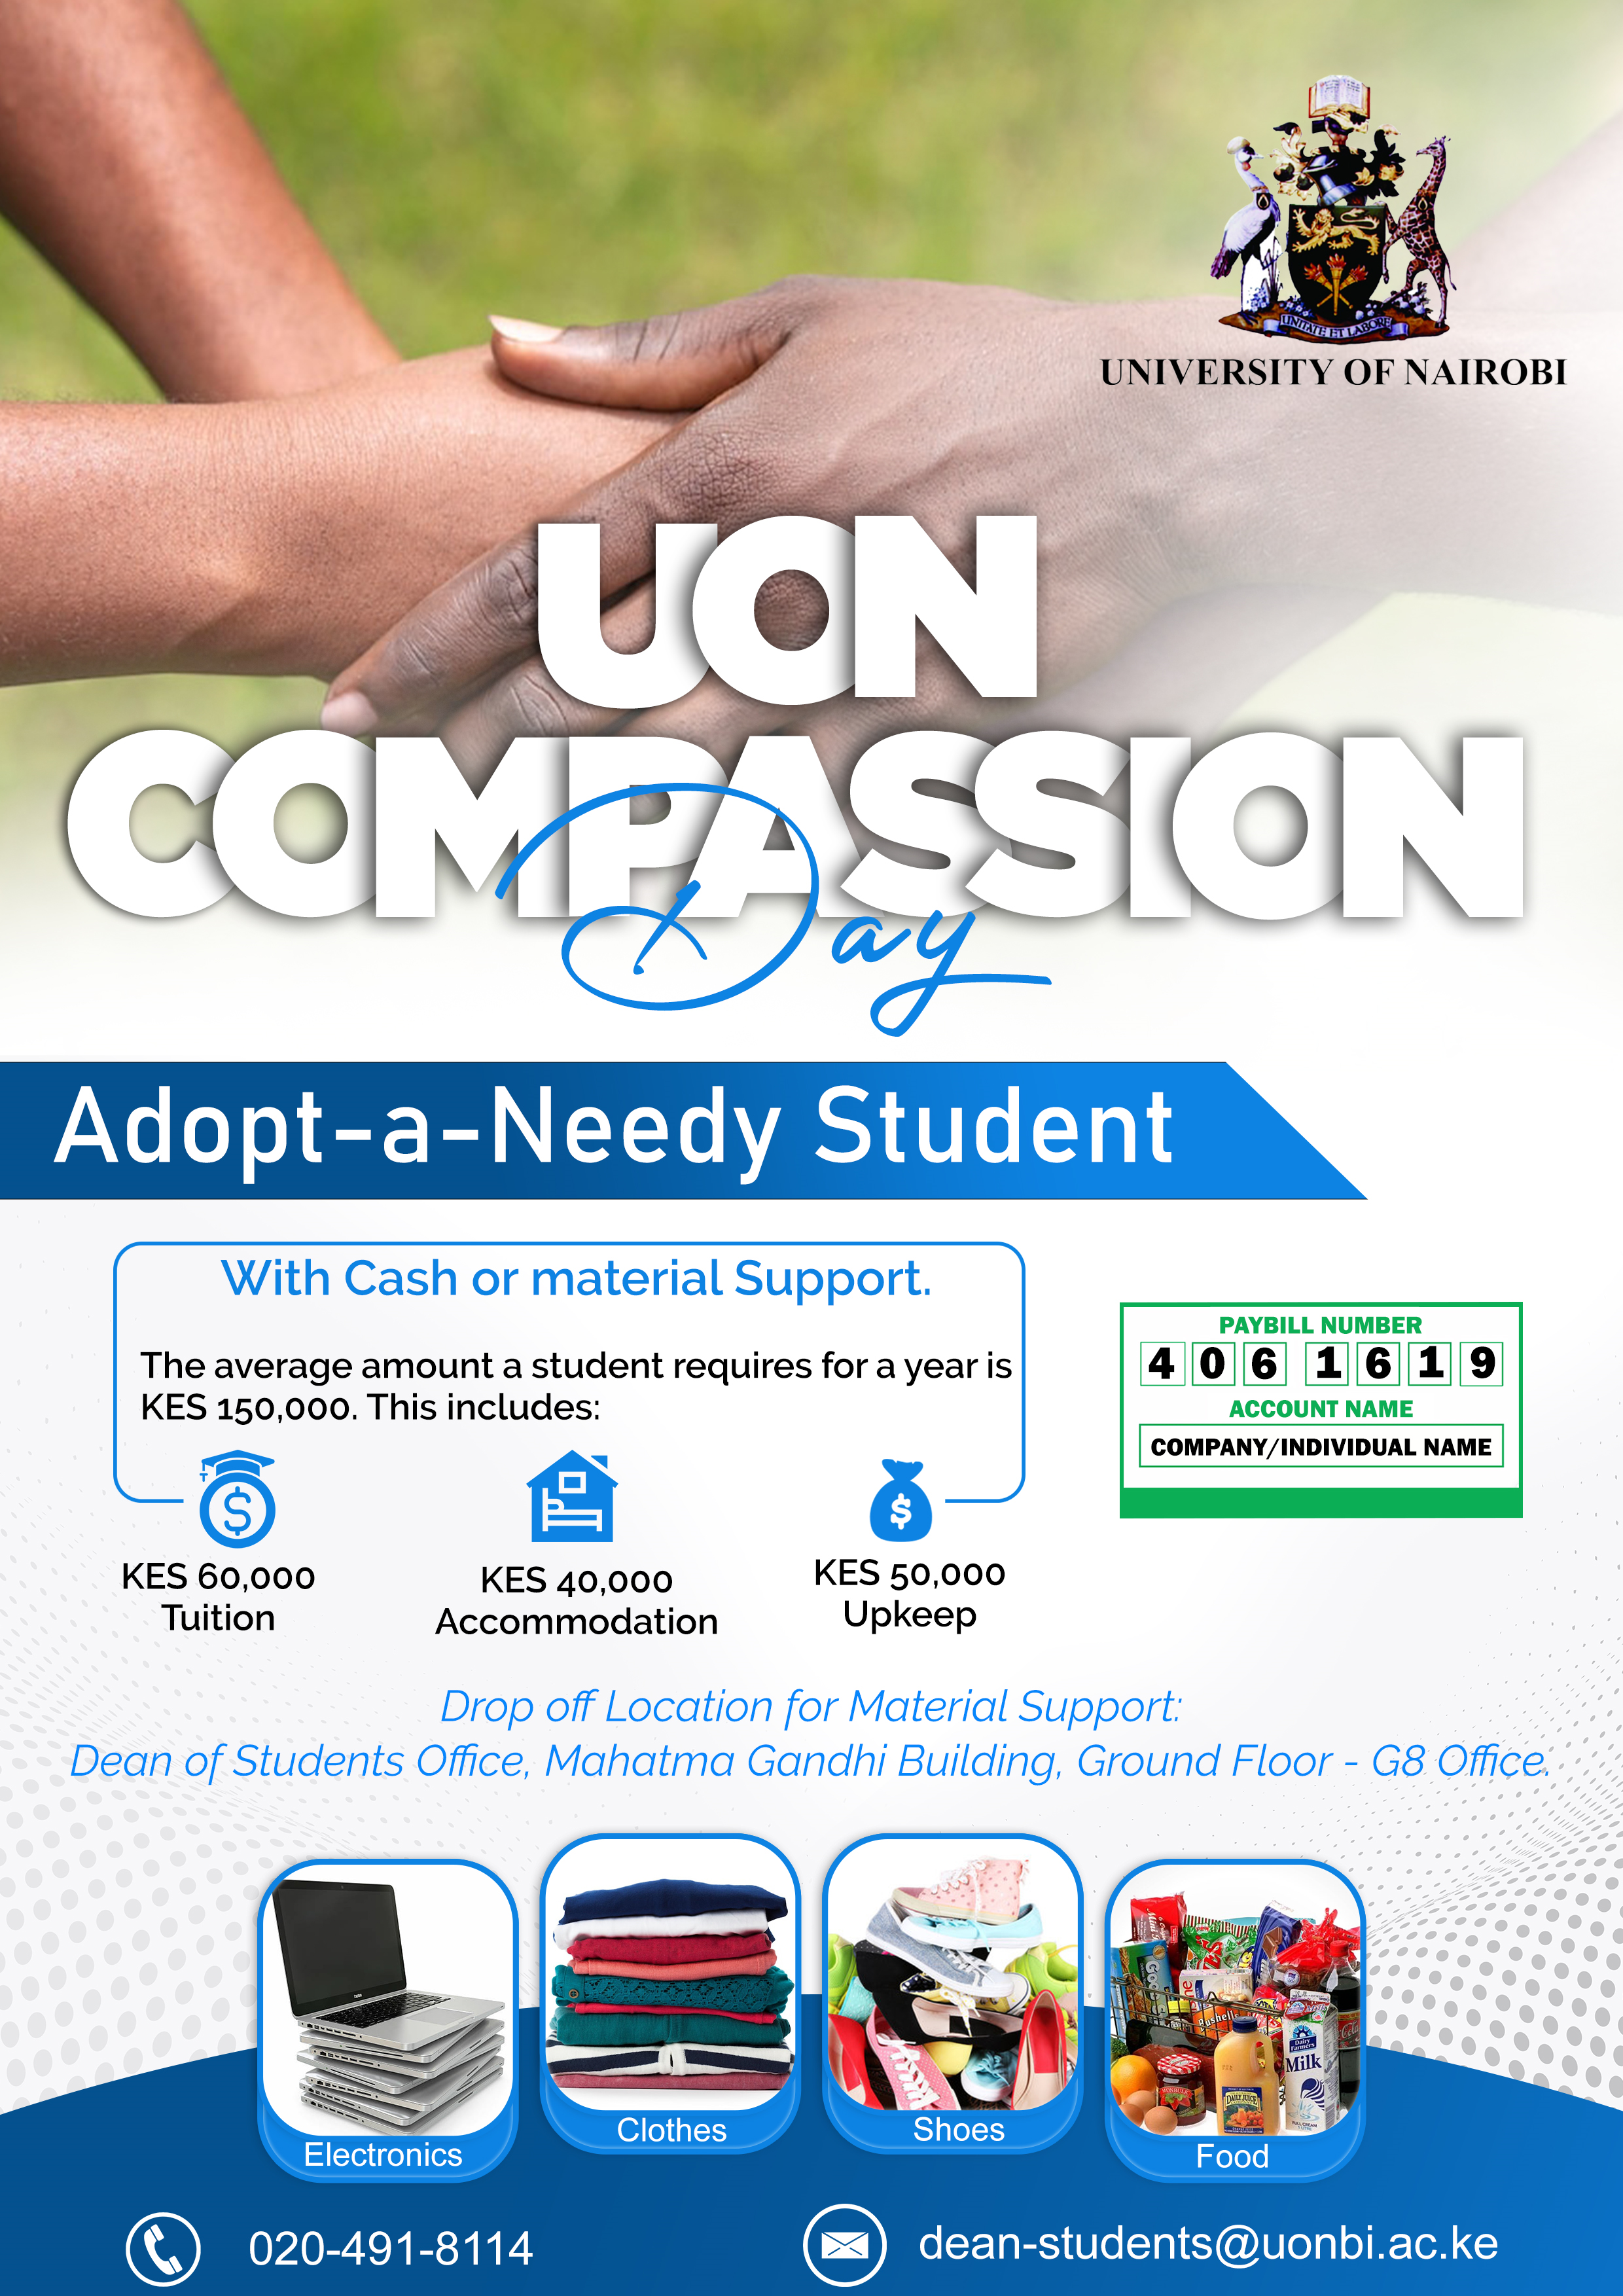 Appeal to support  UoN Compassion Day